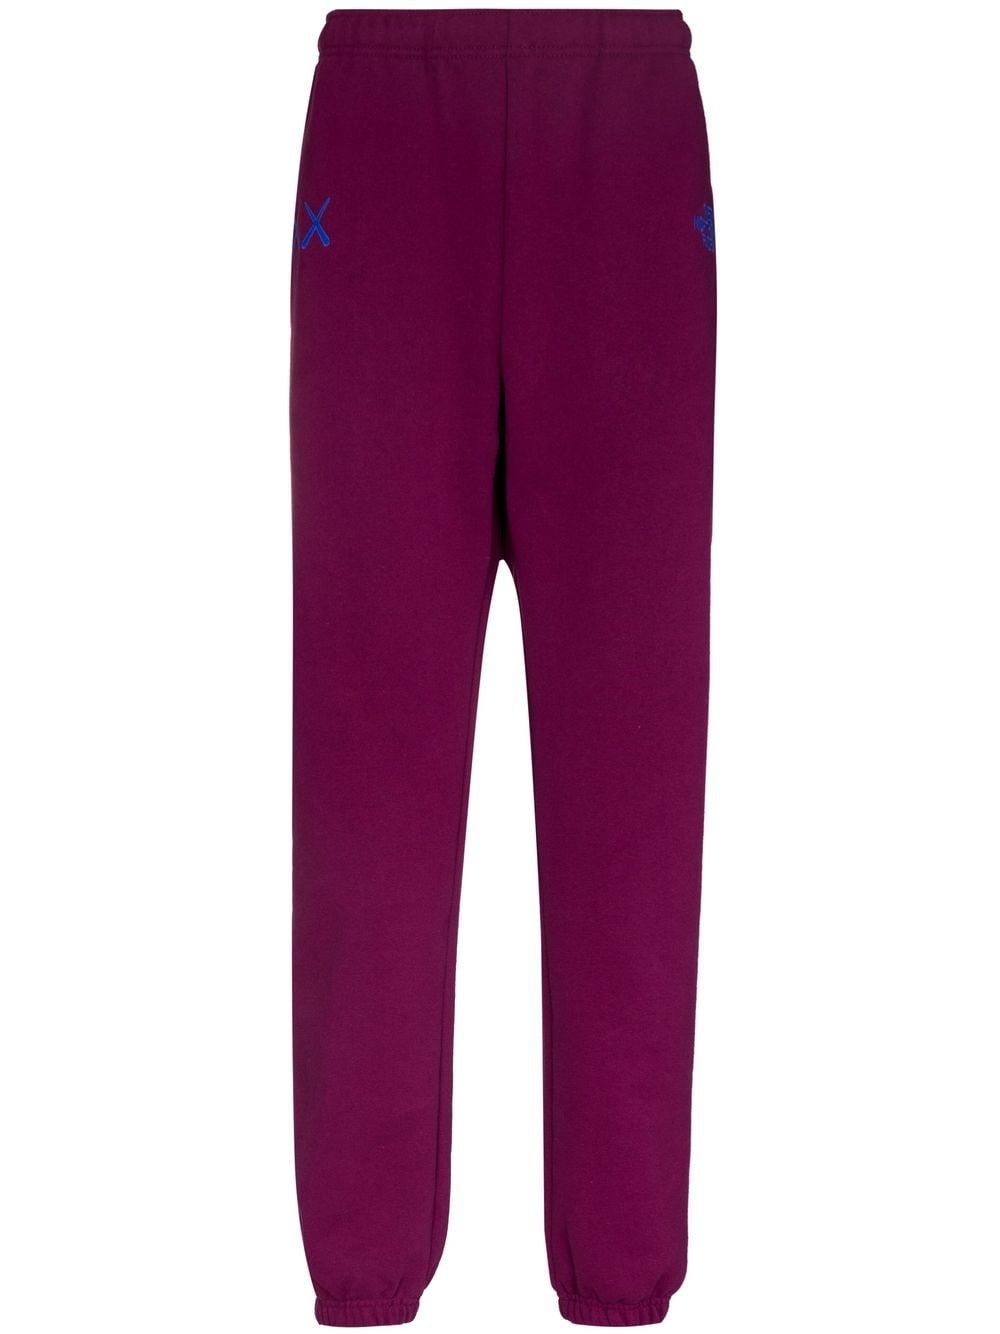 The North Face x KAWS track pants - Purple von The North Face